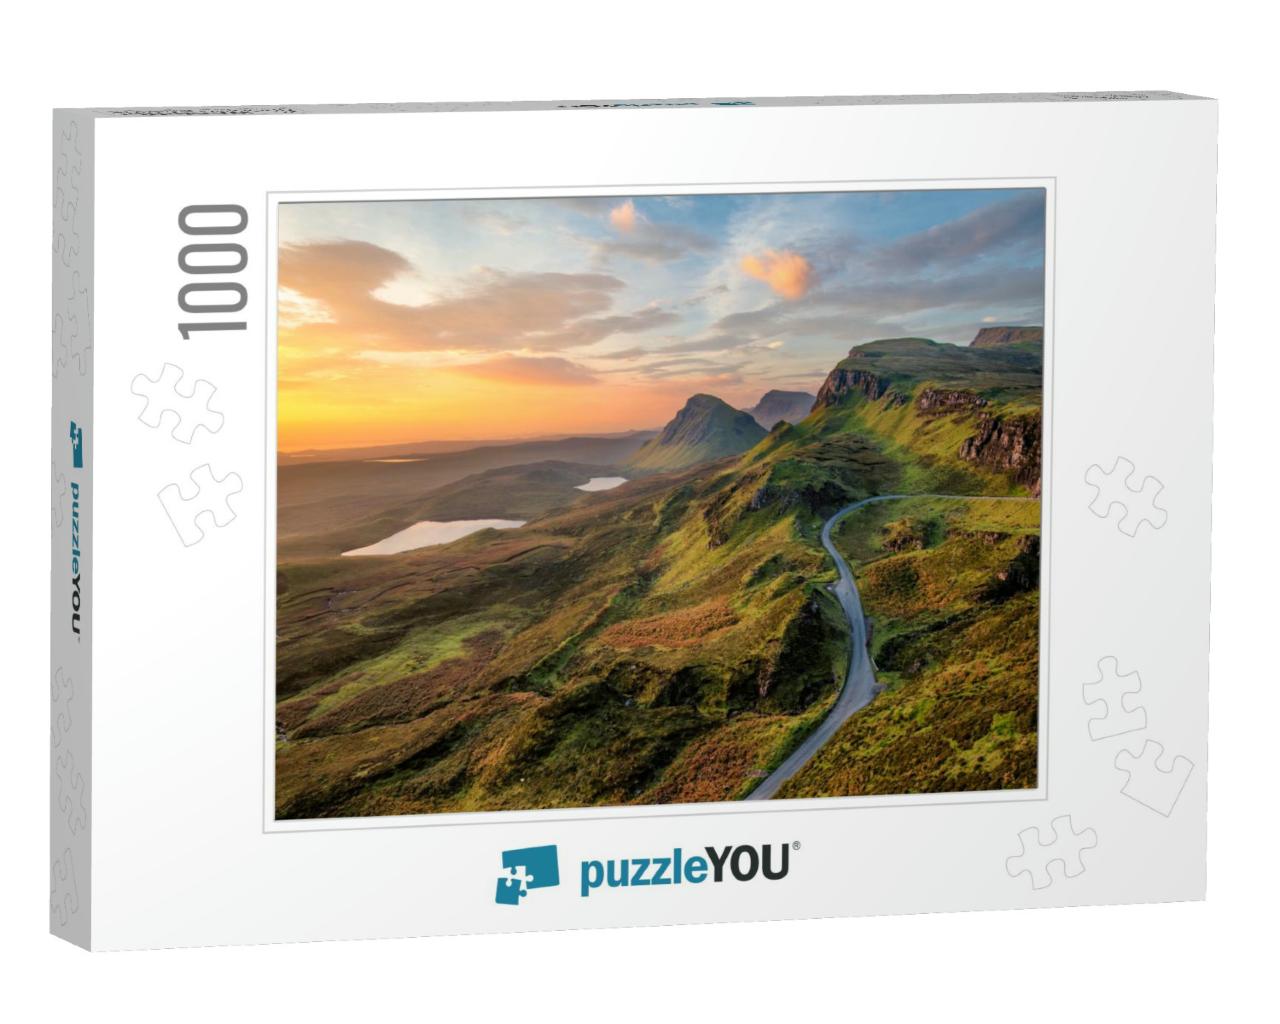 Vibrant Sunrise At Quiraing on the Isle of Skye, Scotland... Jigsaw Puzzle with 1000 pieces